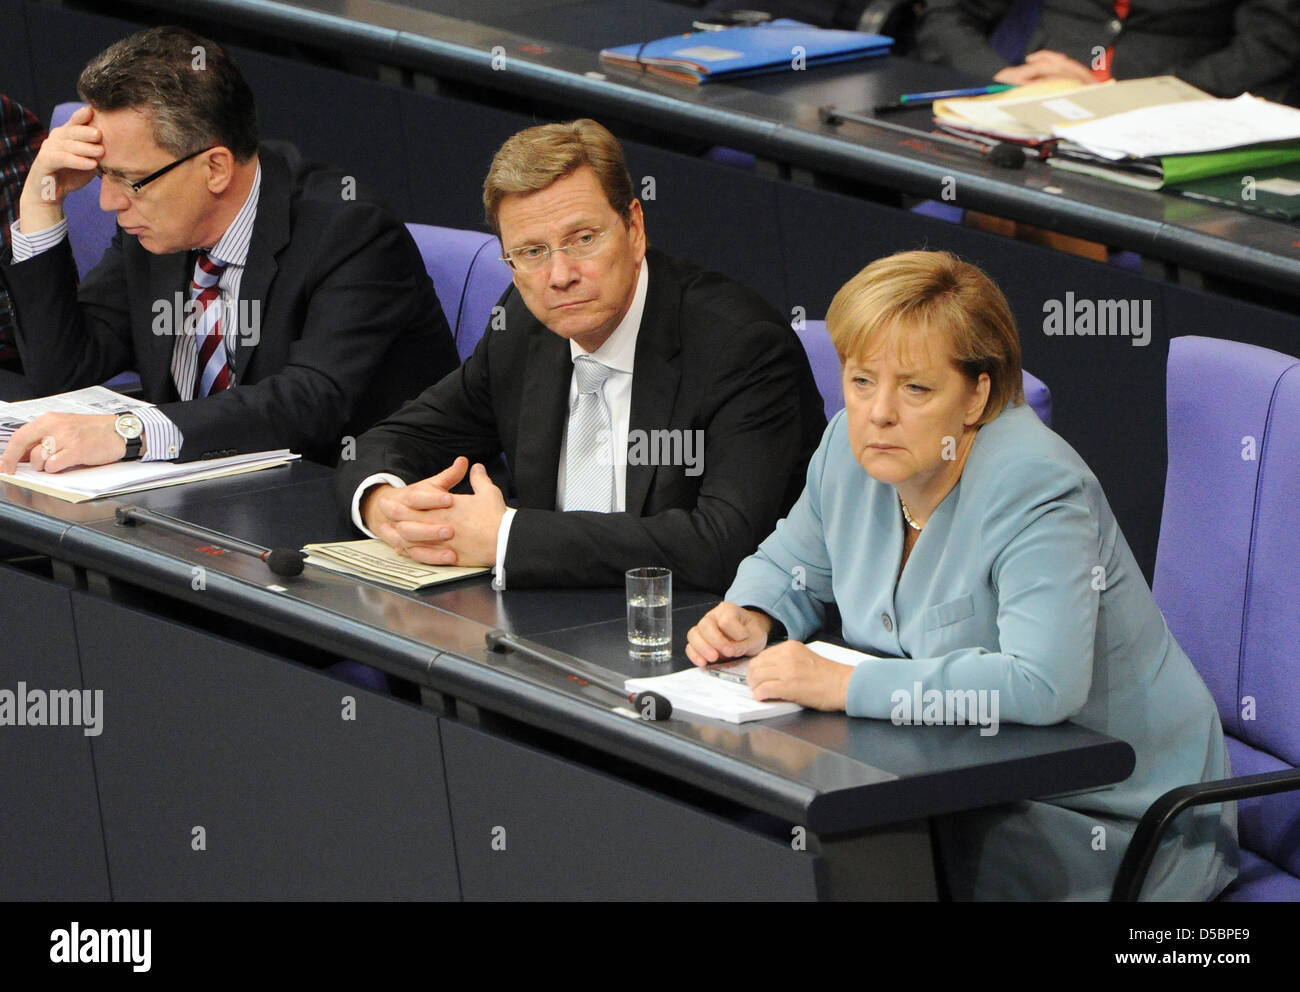 (L to R) German Interior Minister Thomas de Maiziere,  Foreign Minister and Vice Chancellor Guido Westerwelle and Chancellor Angela Merkel attend a Bundestag (German Parliament) session at the Reichstag in Berlin, Germany, 14 September 2010. The German Parliament is discussing the controversial 2011 budget, which entails spending cuts adding up to 12 billion euros, mainly in social Stock Photo